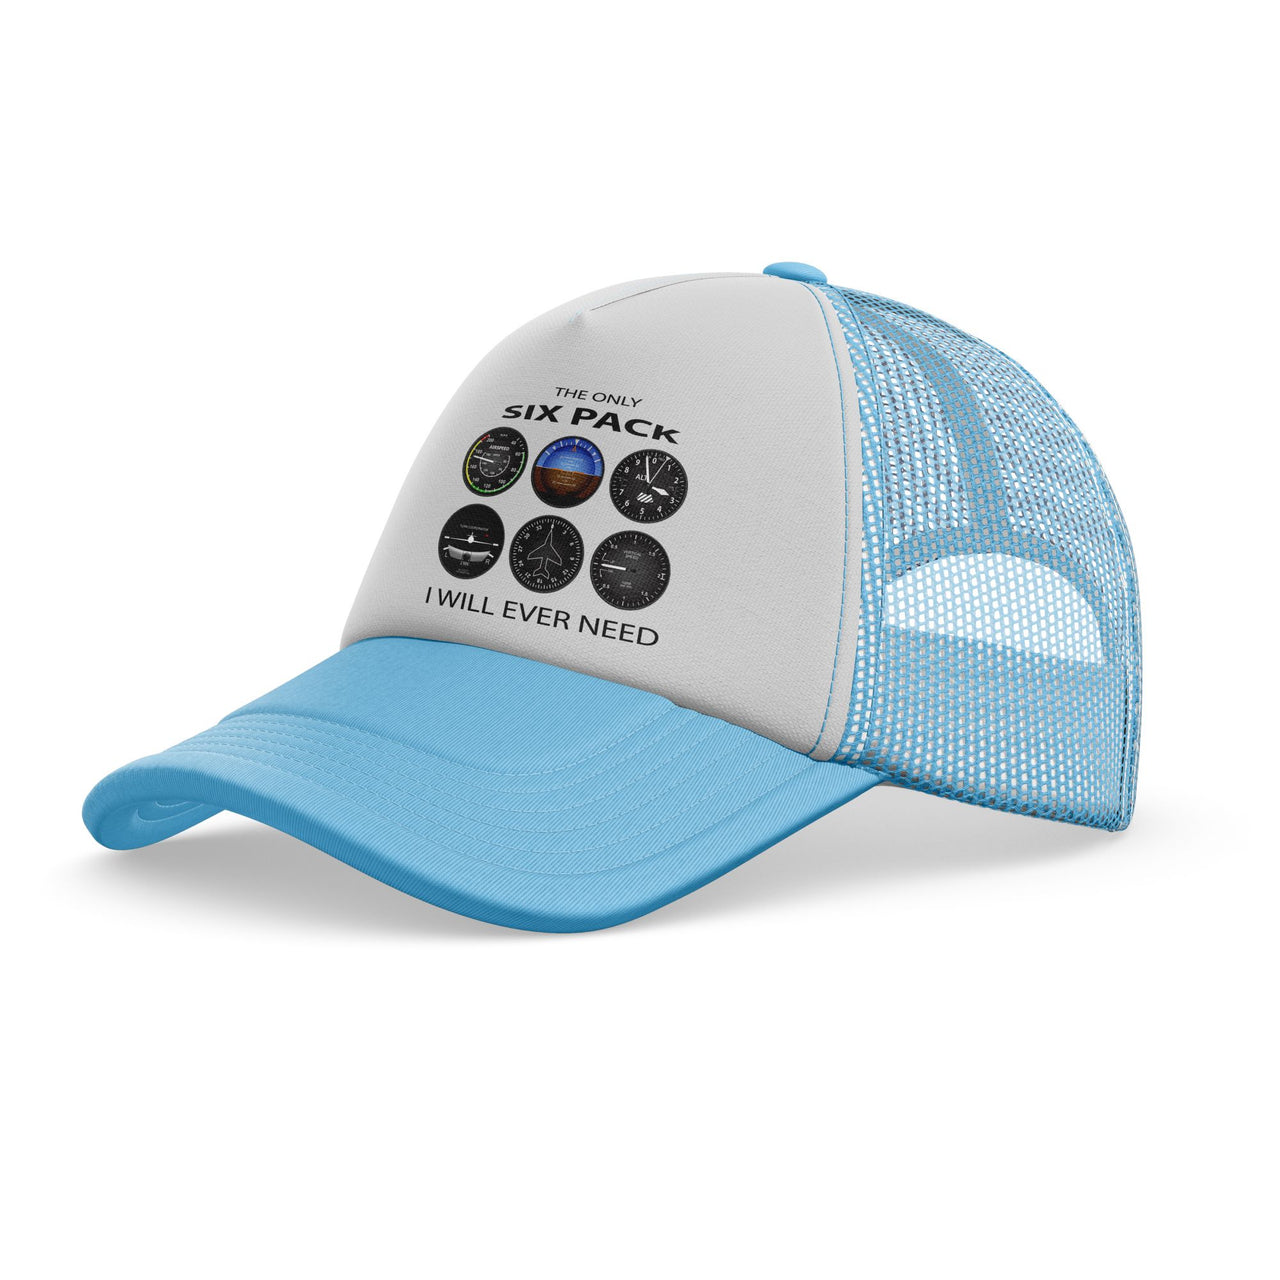 The Only Six Pack I Will Ever Need Designed Trucker Caps & Hats